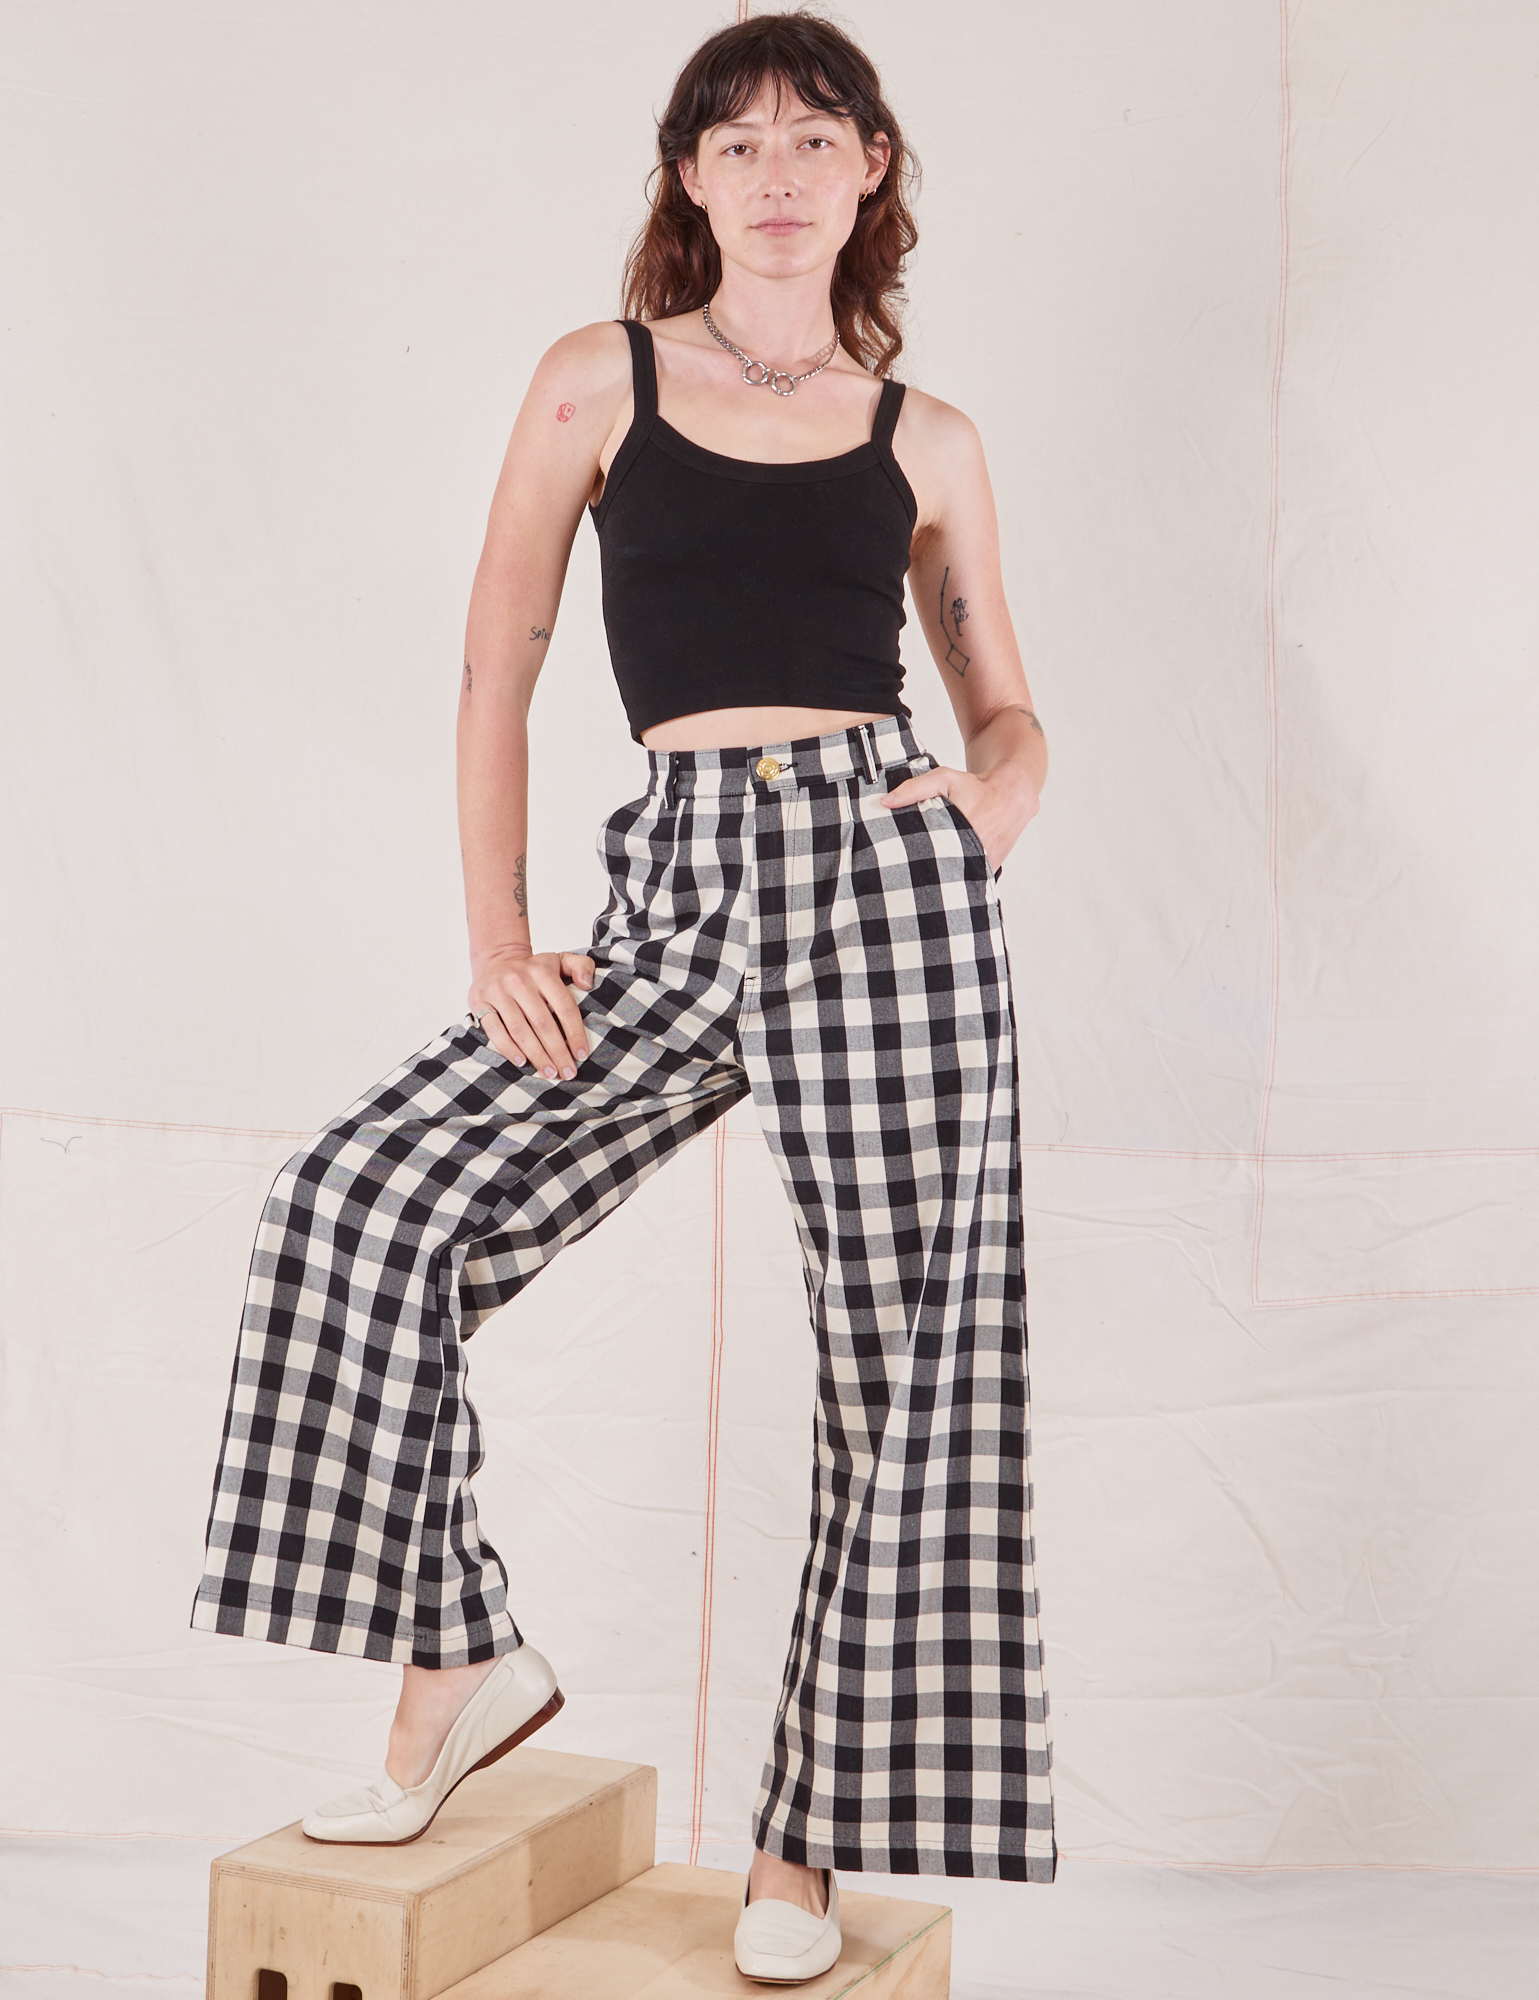 Alex is wearing Wide Leg Trousers in Big Gingham and black Cropped Cami